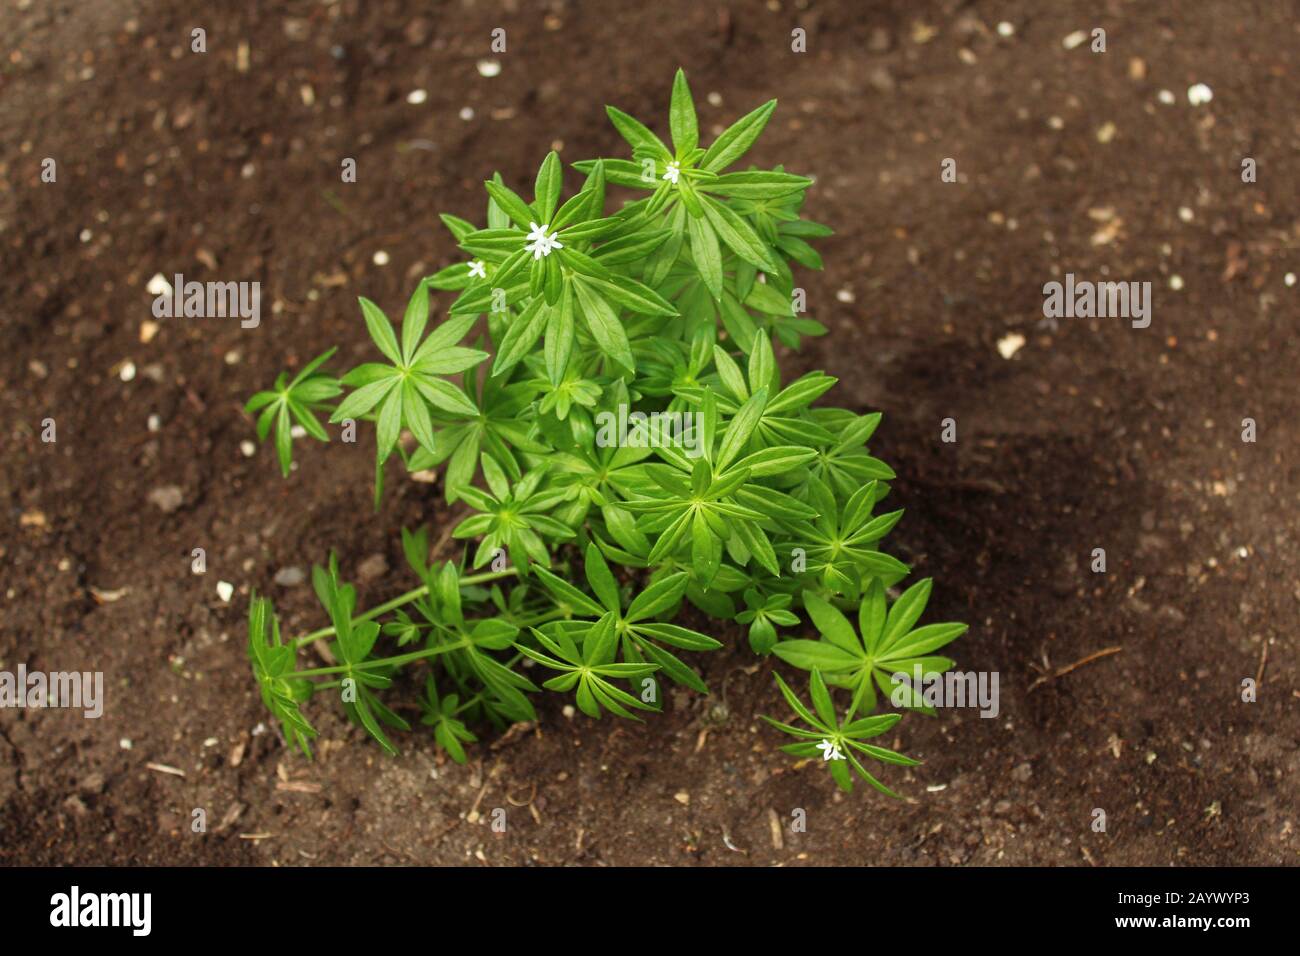 The picture shows woodruff in the garden in the ground Stock Photo